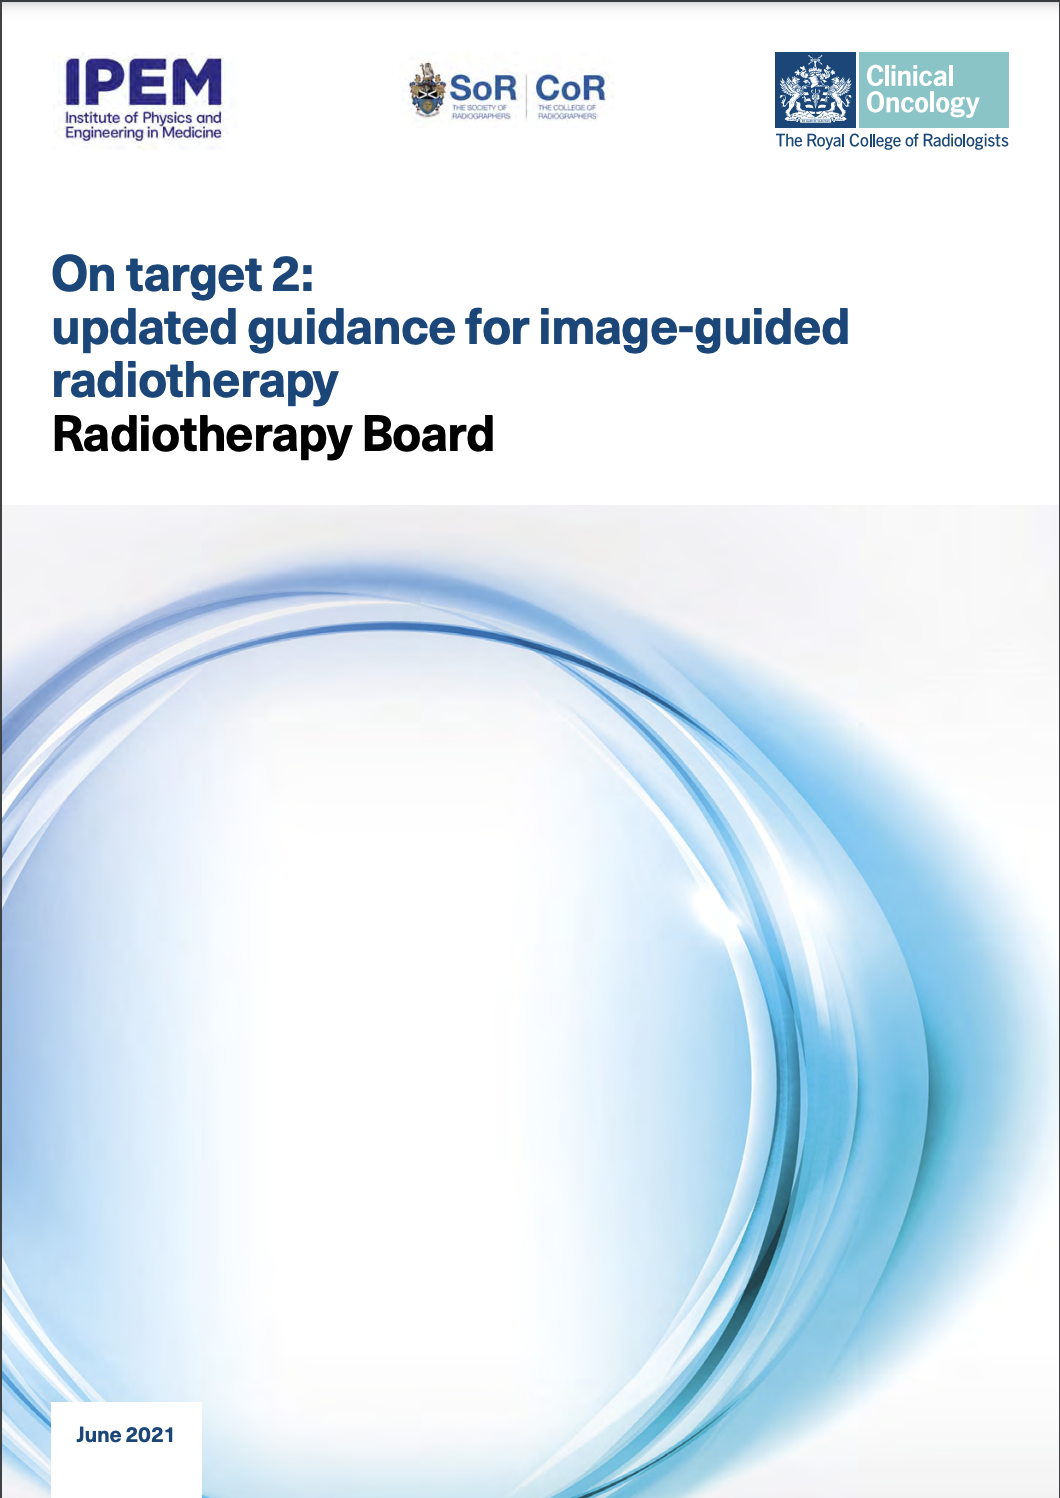 On Target 2: updated guidance for image-guided radiotherapy from the Radiotherapy Board